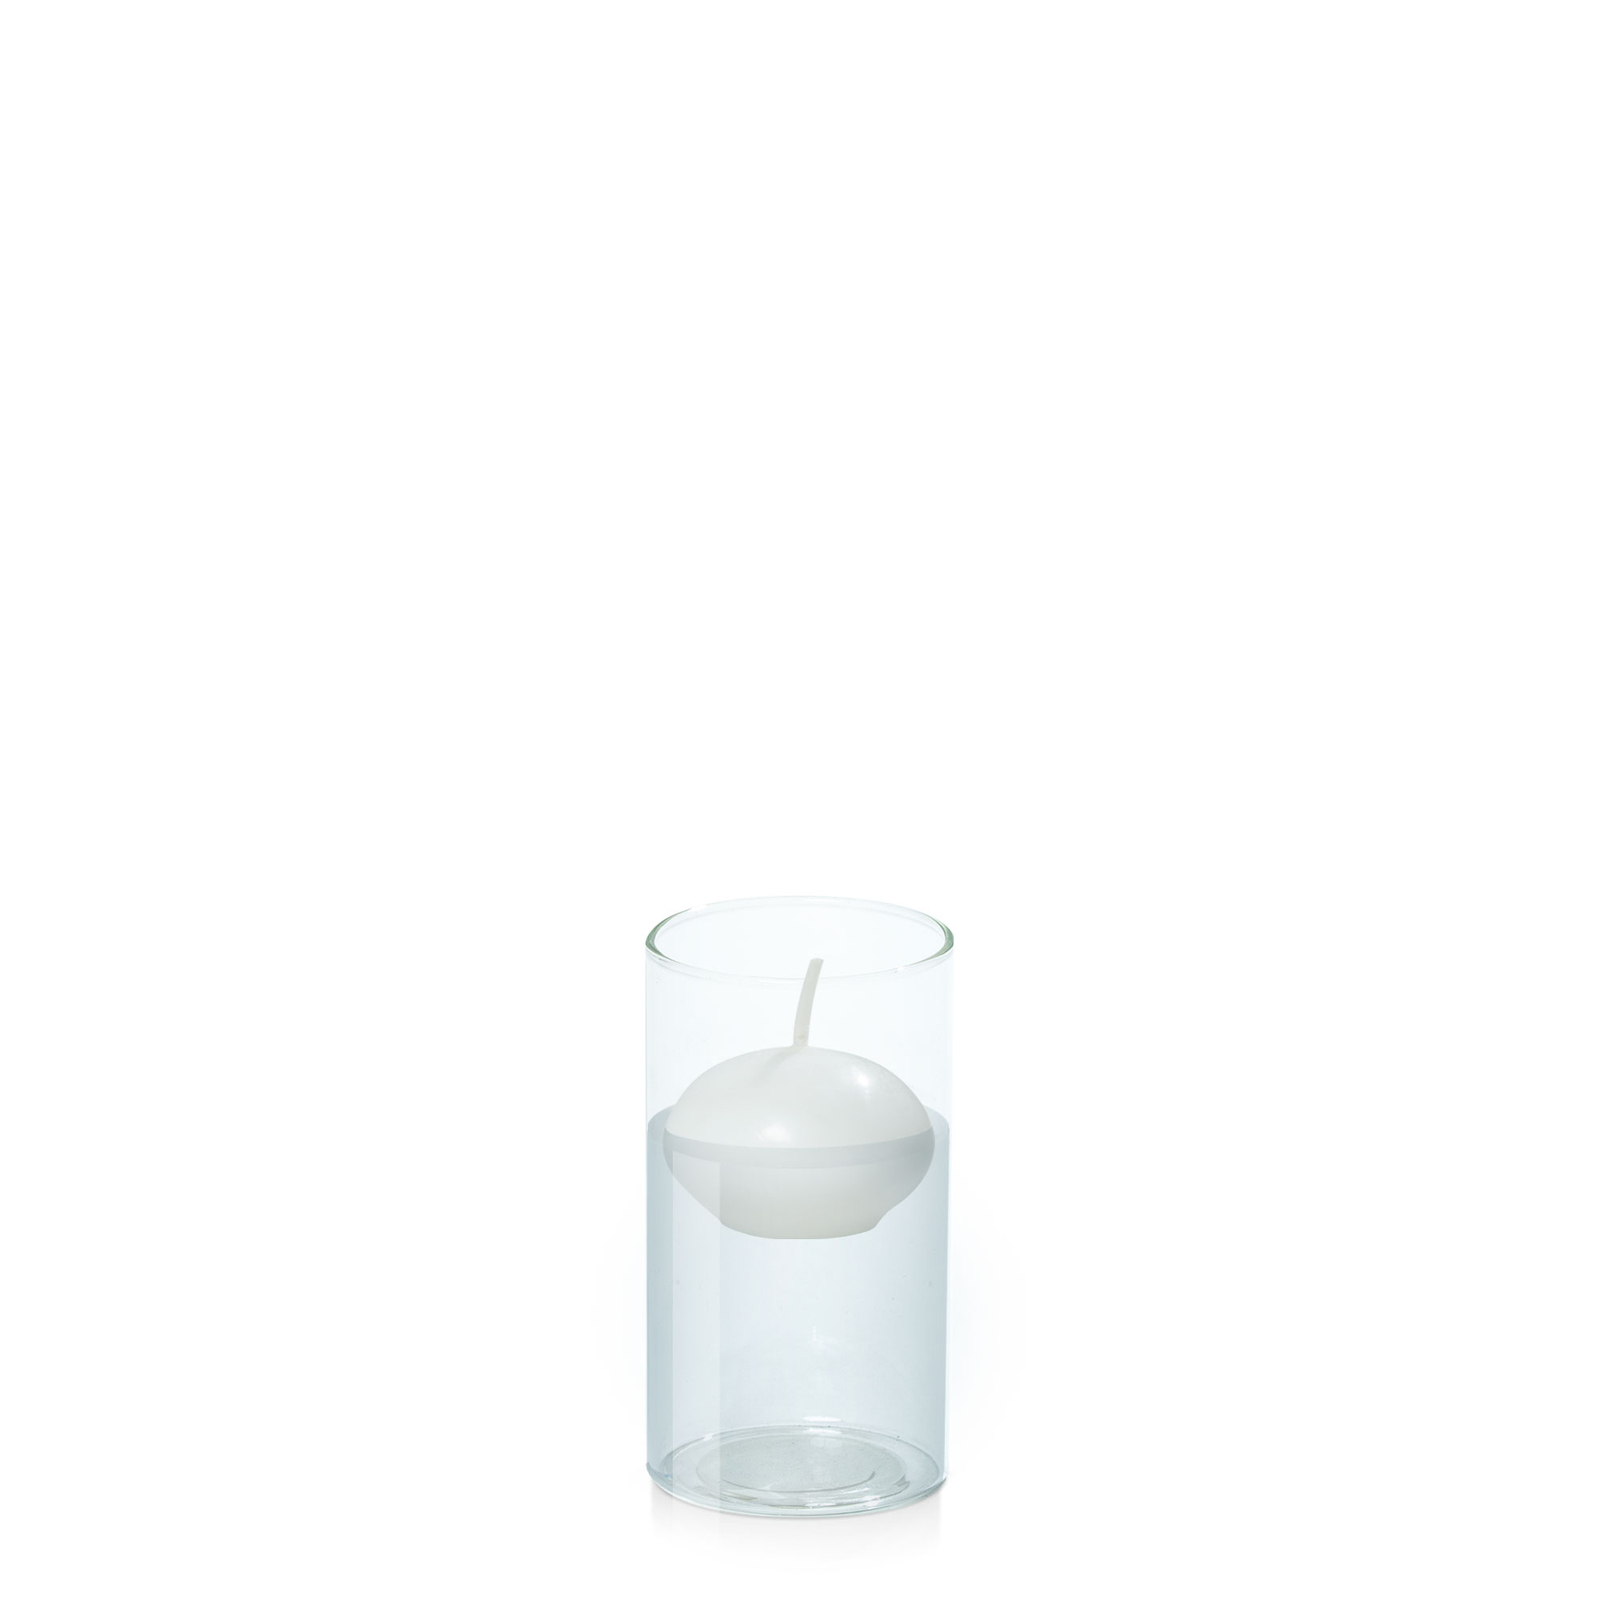 4cm Floating Candle in 5.8cm x 12cm Glass